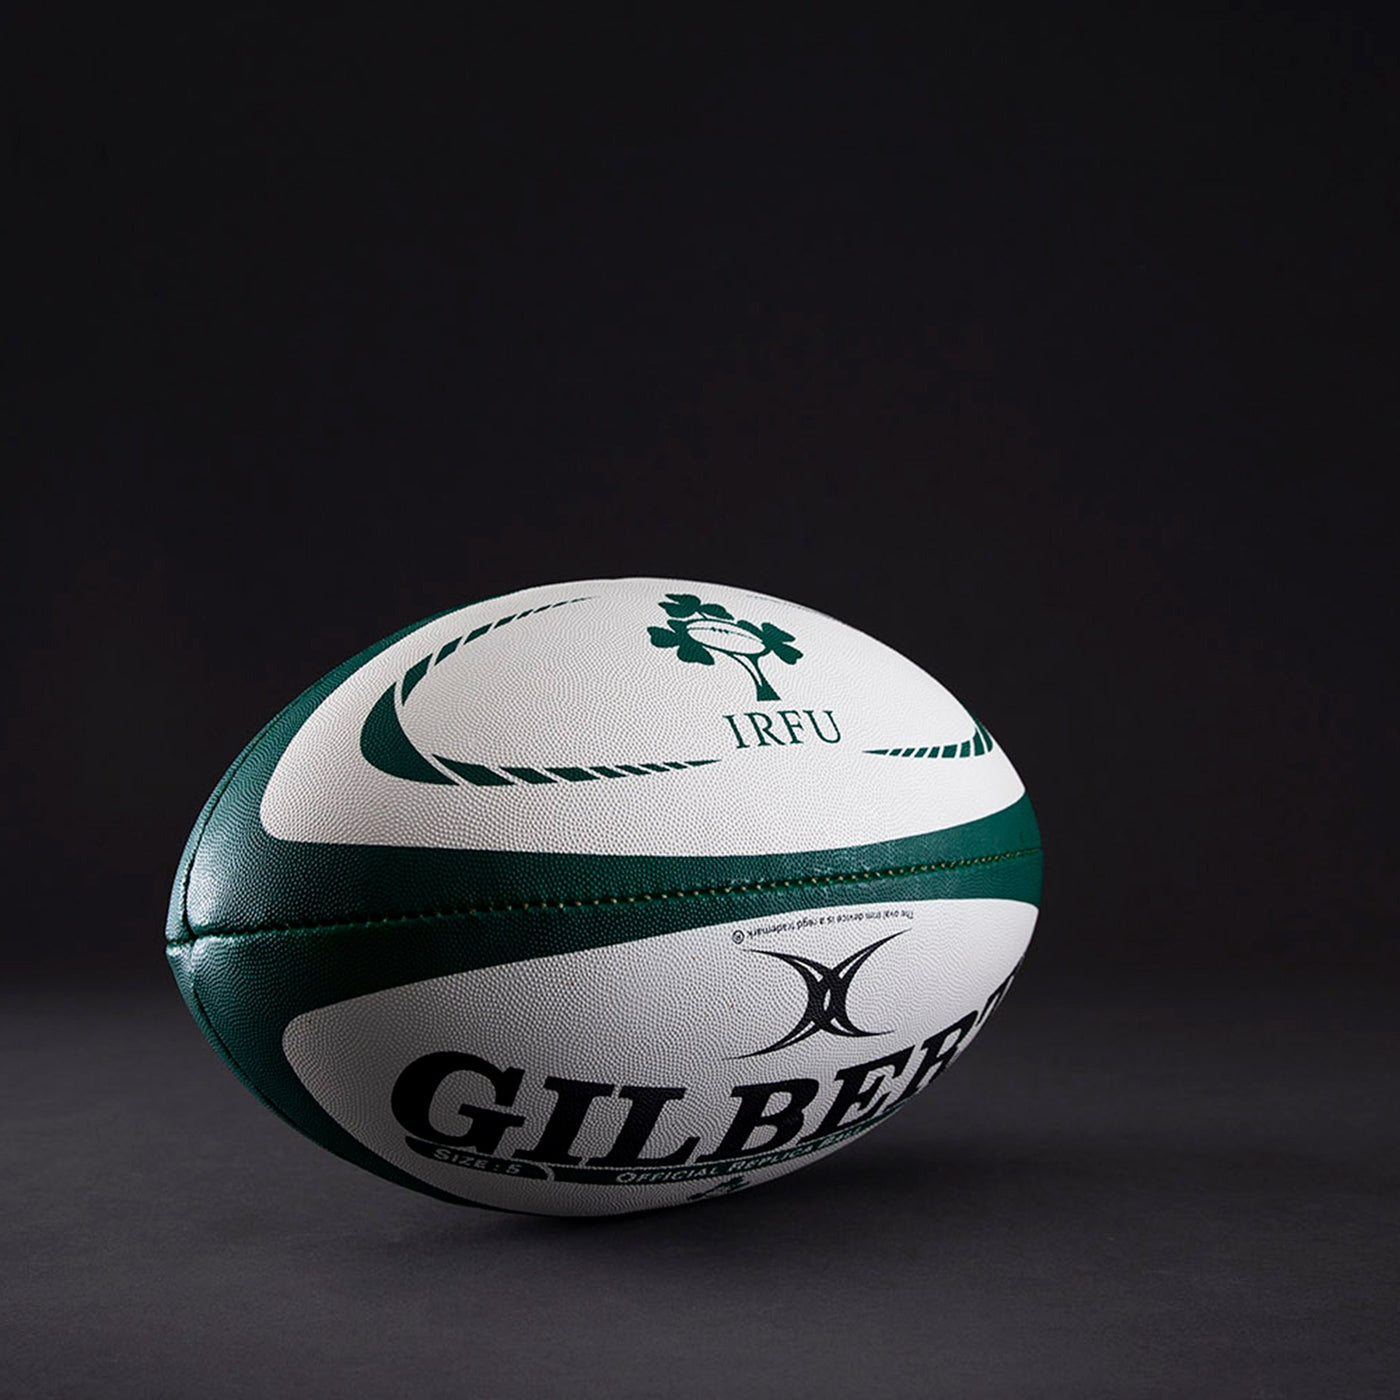 Ireland Replica Rugby Ball Size 5